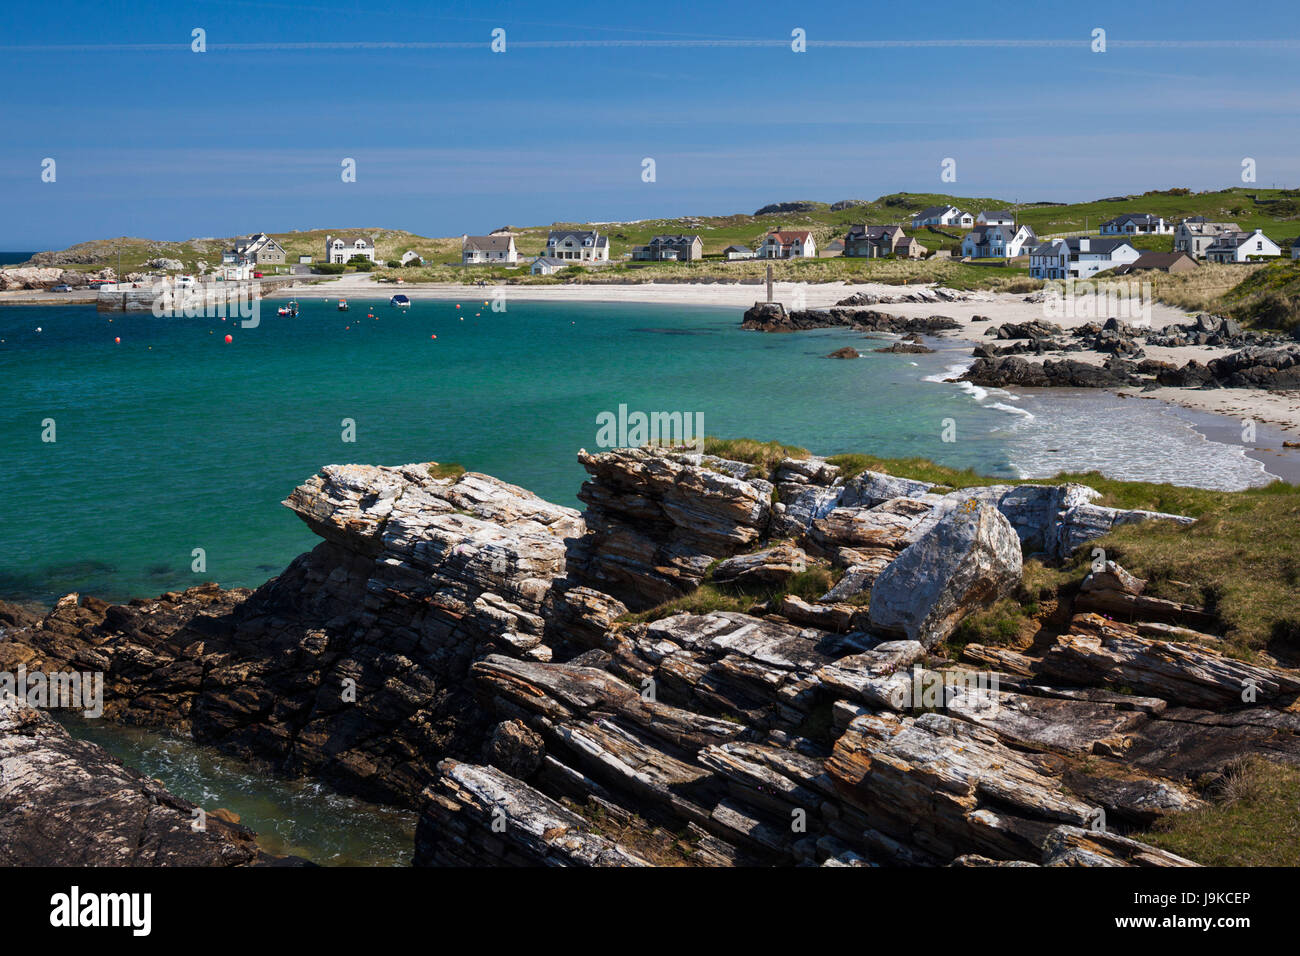 Ireland, County Donegal, Dunfanaghy, small harbor Stock Photo